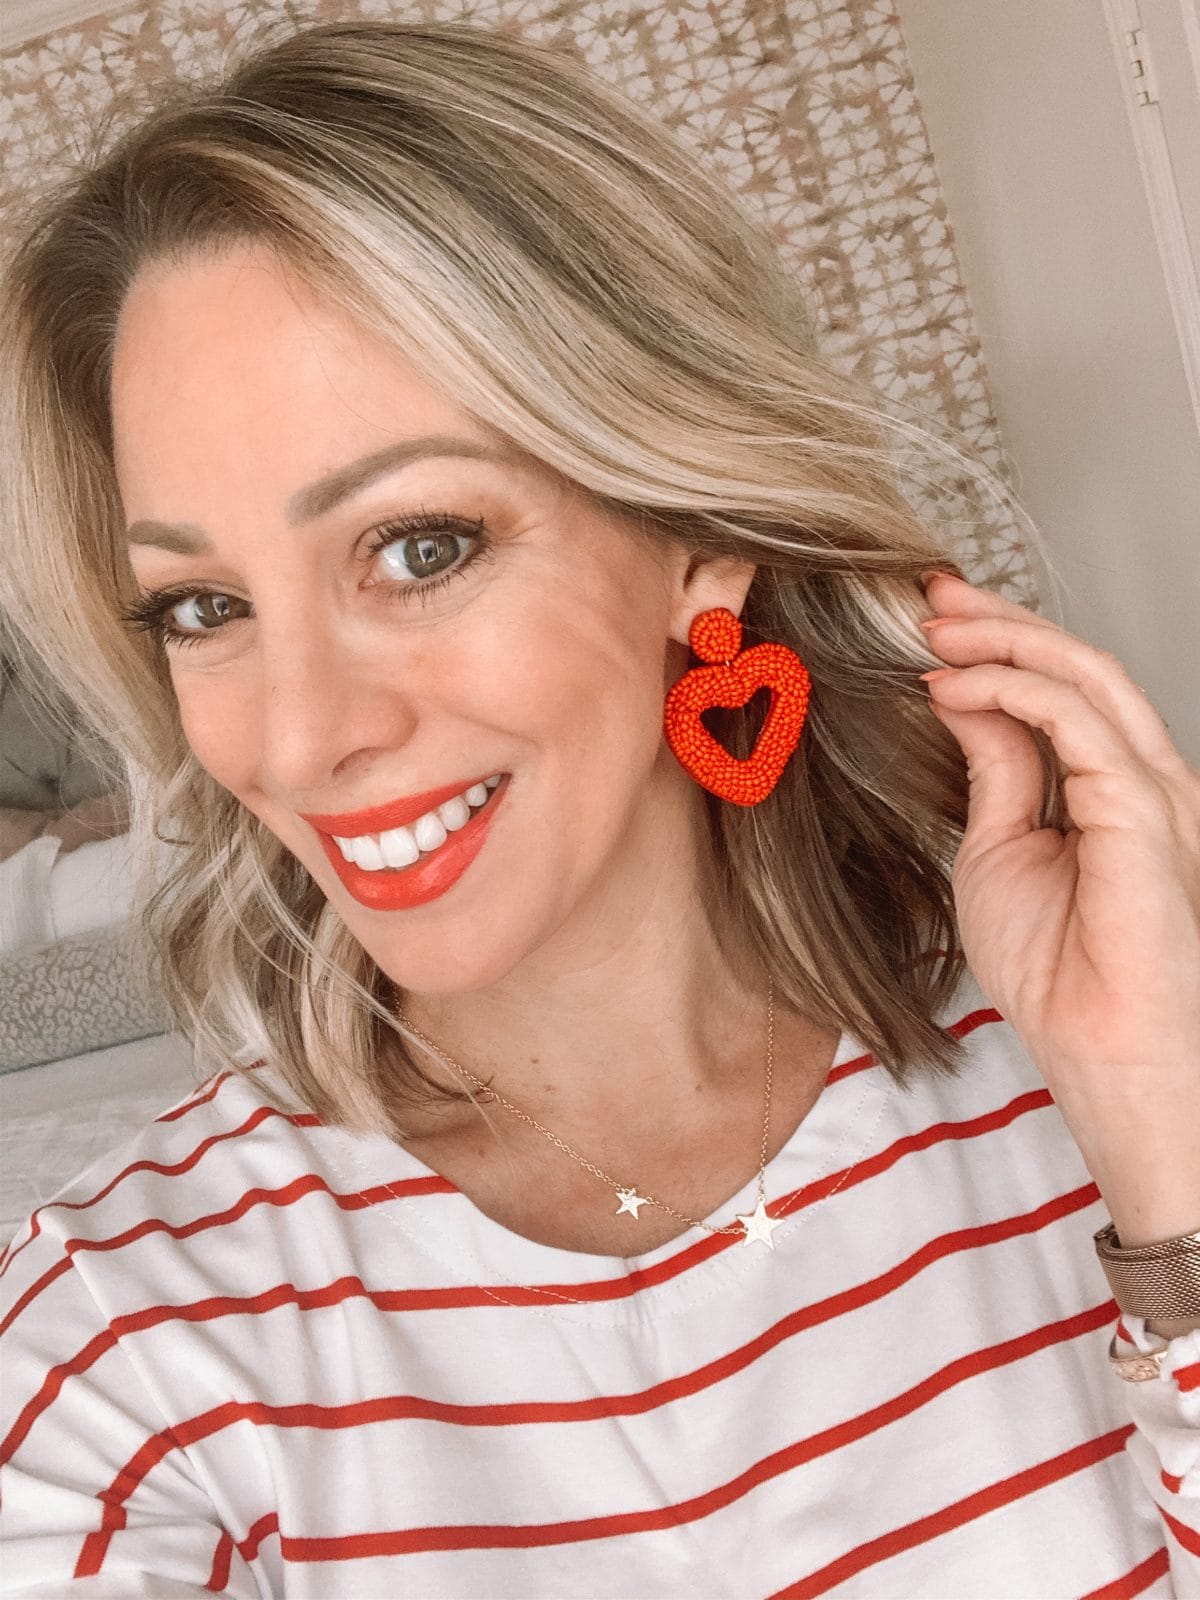 Red and White Stripe Top, Star Necklace, Heart Earrings